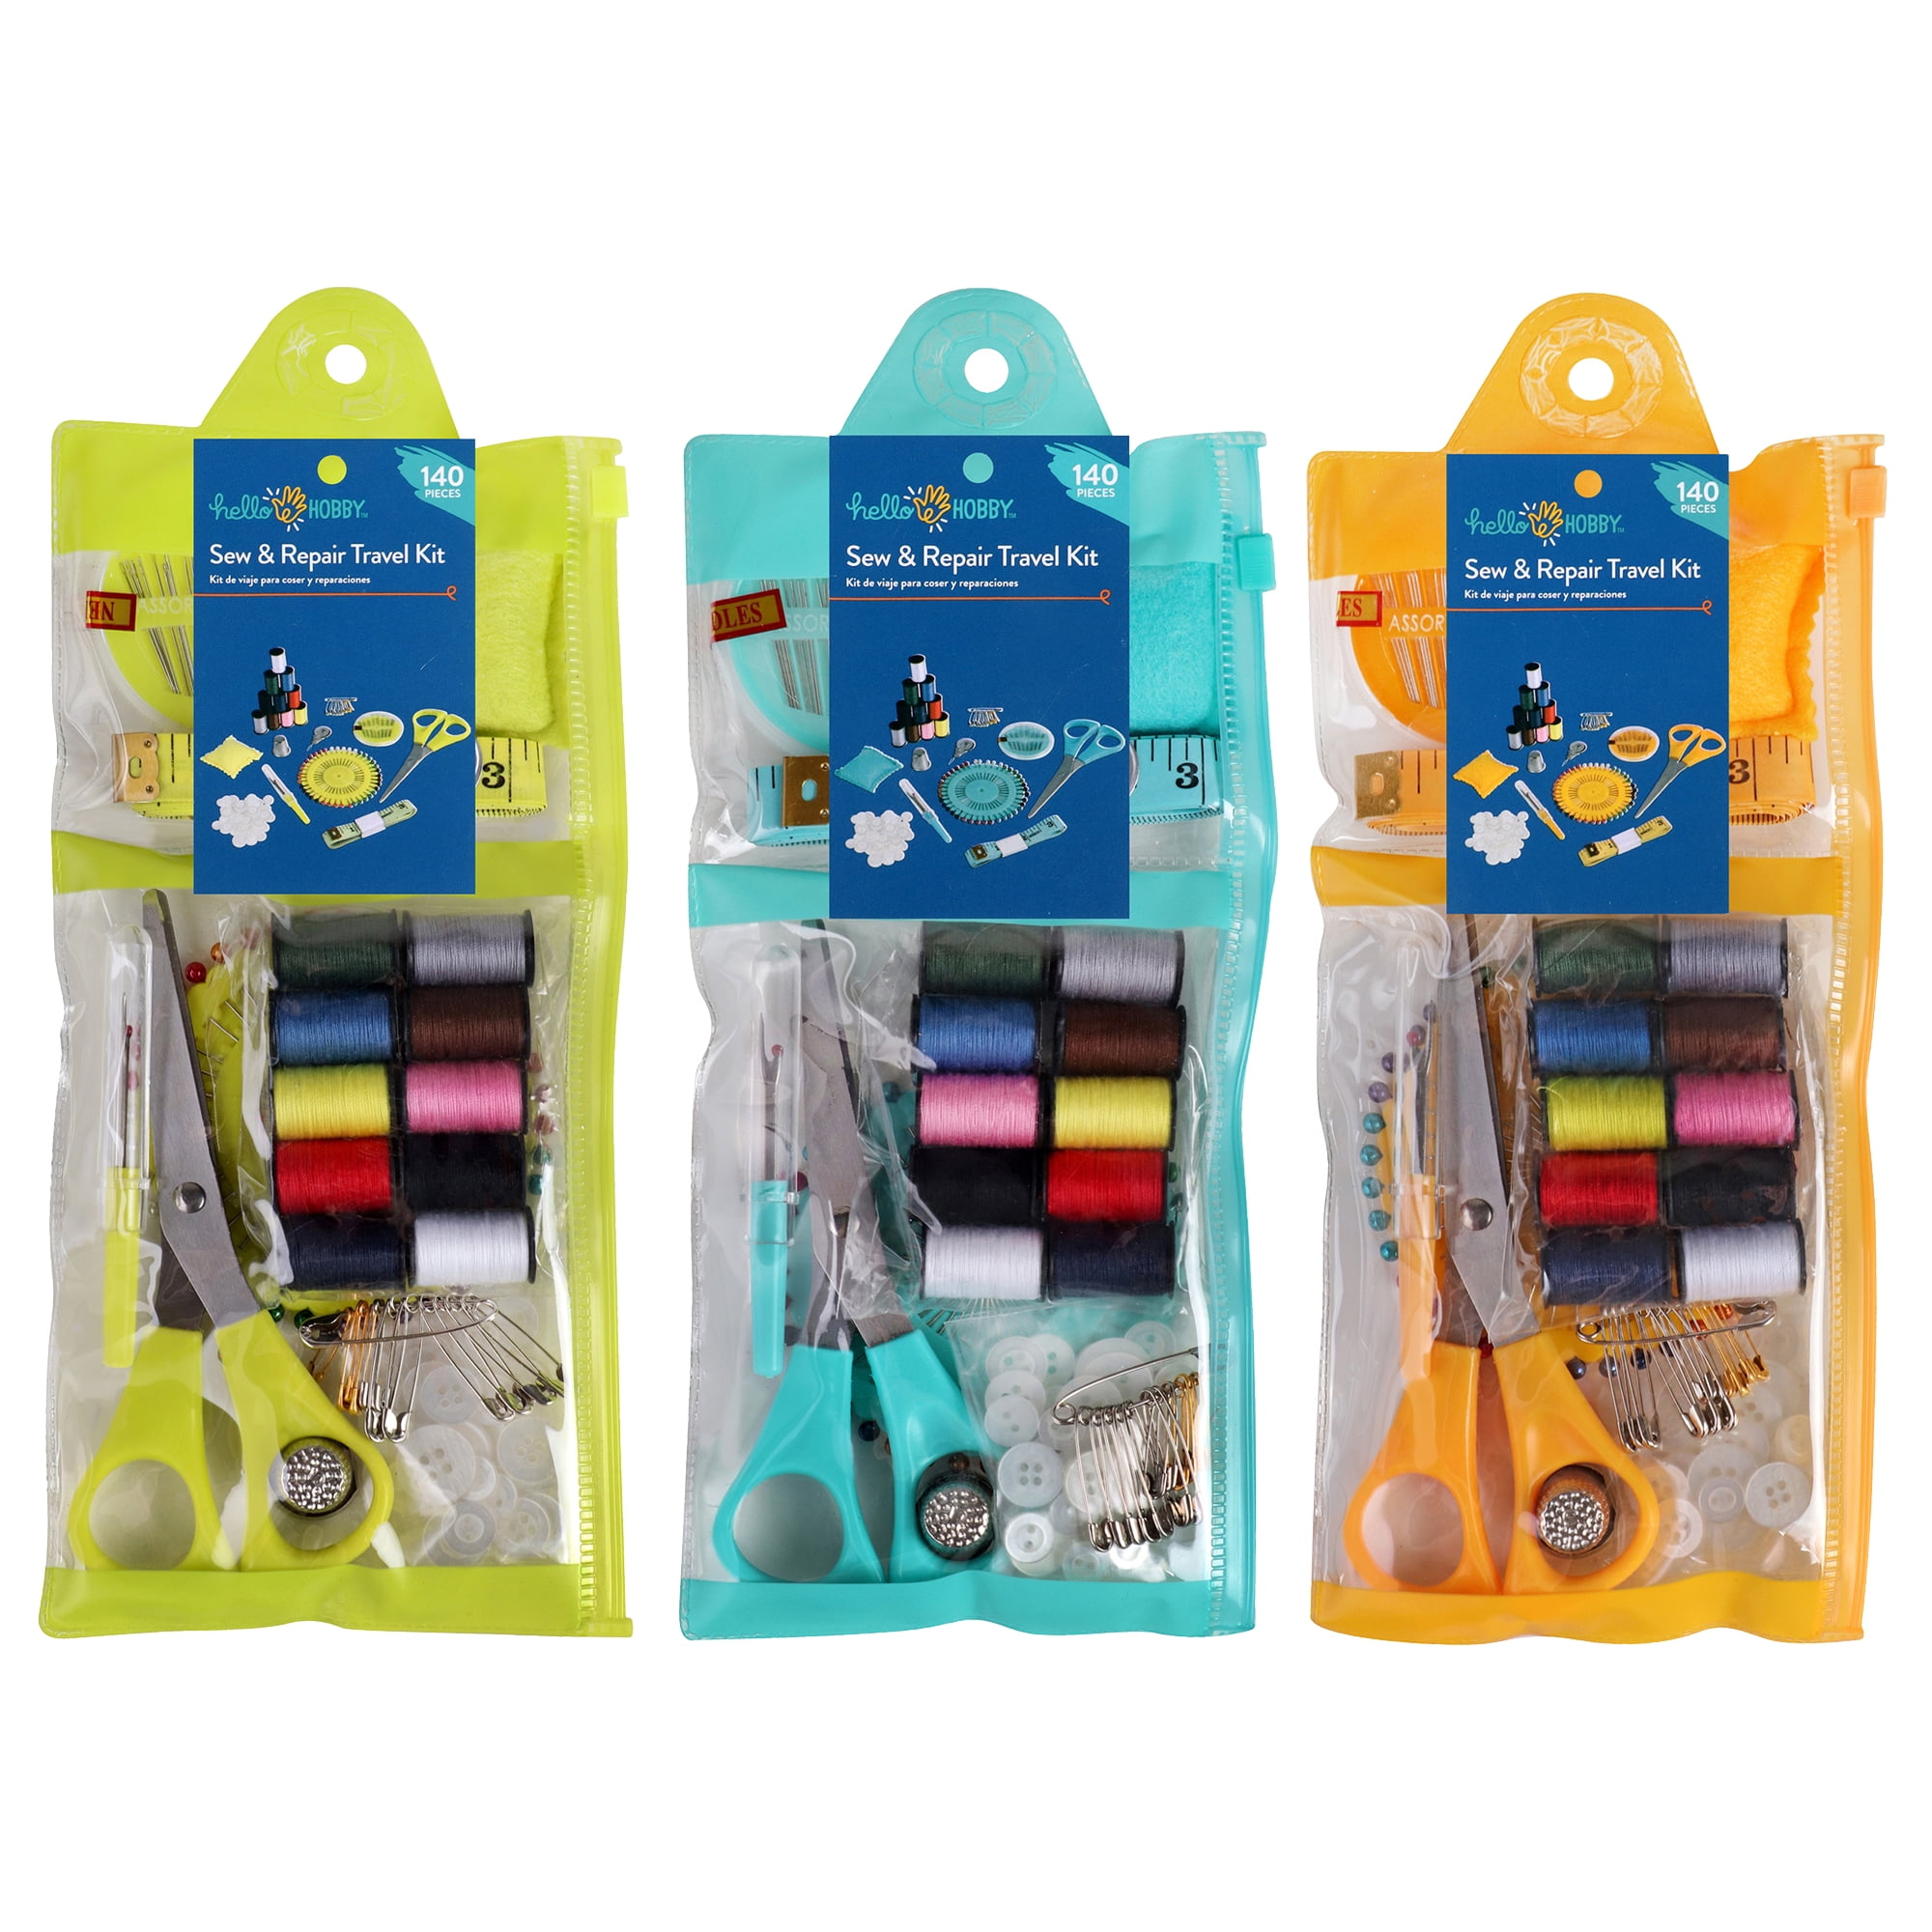 Hello Hobby Sew and Repair Travel Kit, 140 Pieces